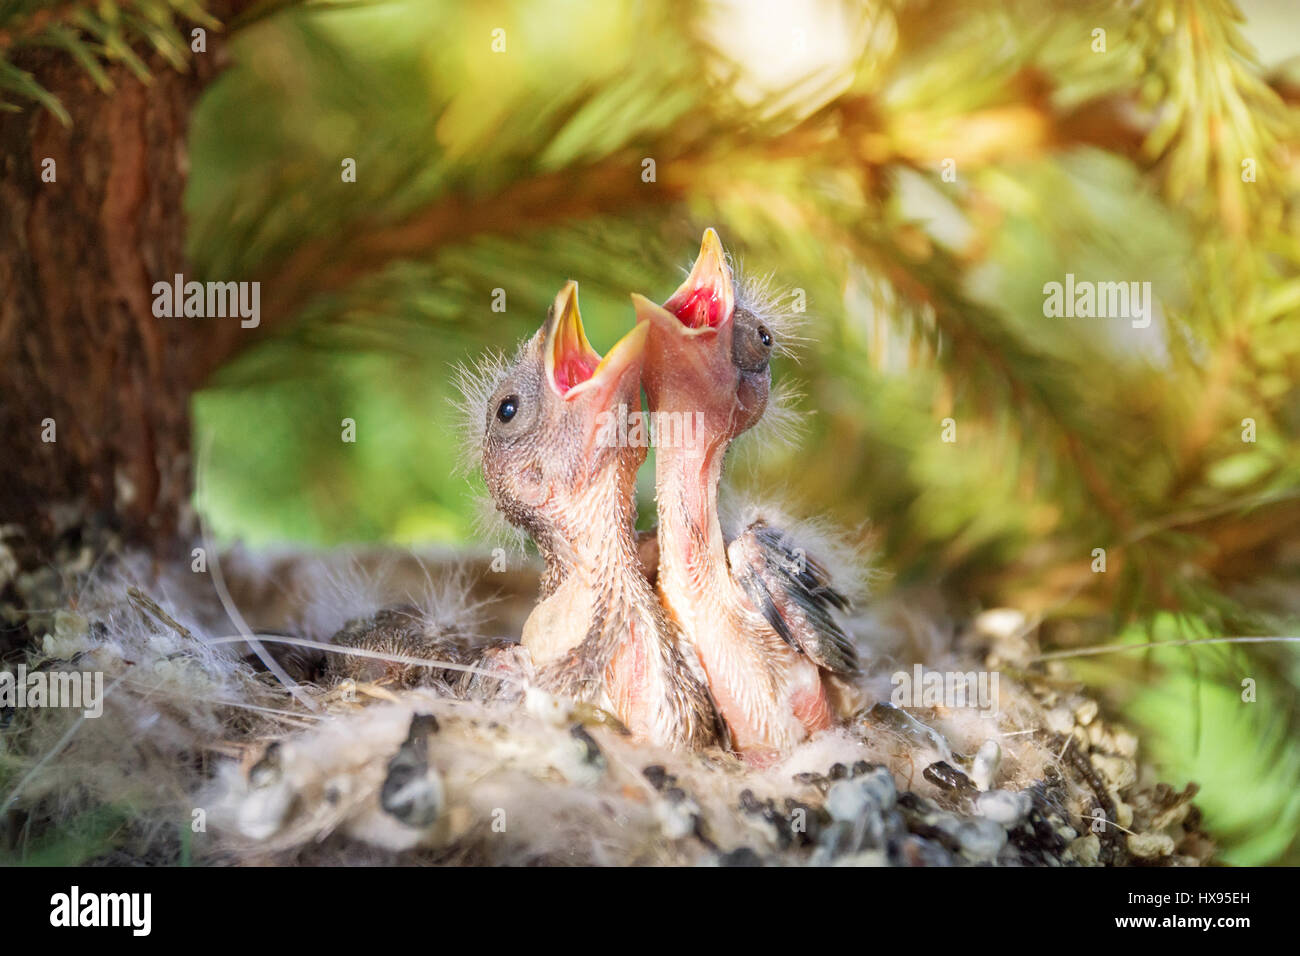 The photo shows the chicks in the nest Stock Photo